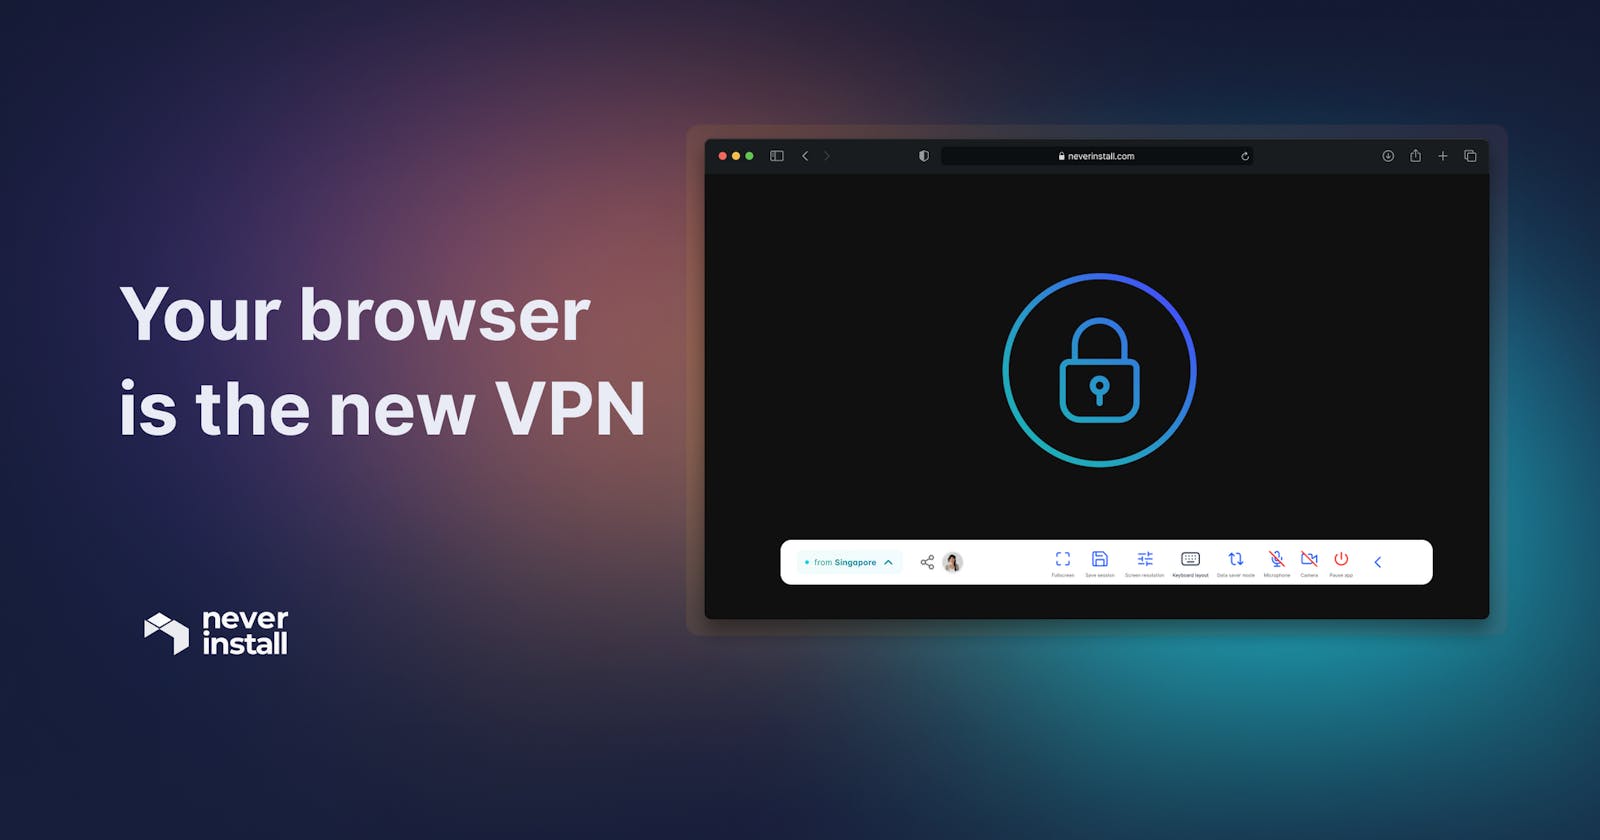 Your browser is the new VPN